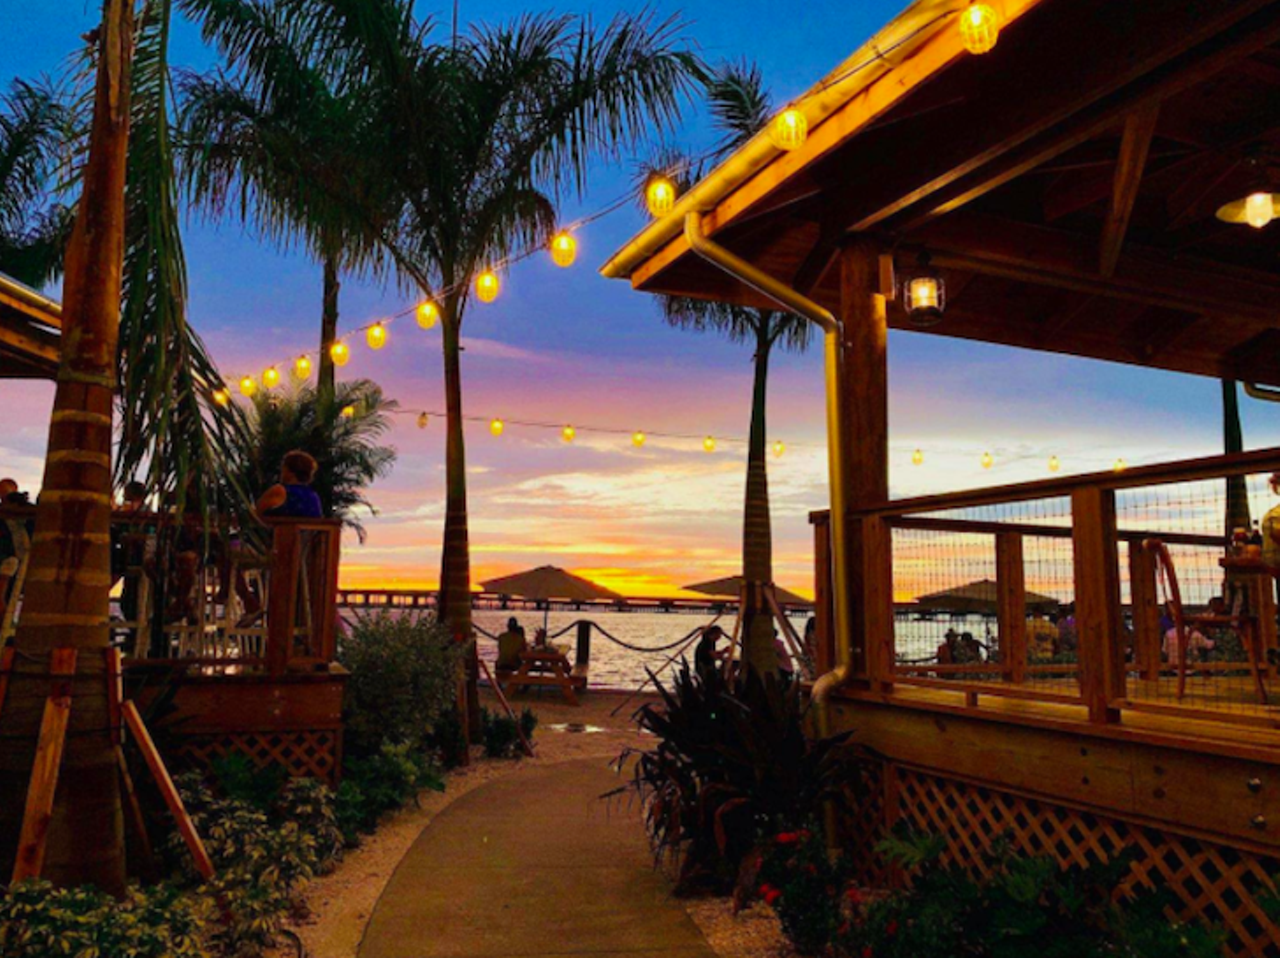 Salt Shack on The Bay
5415 W Tyson, Tampa, 813.444.4569
Get your seafood fix at Salt Shack On The Bay, where you can sit at one of their outside tables overlooking the Old Tampa Bay.
Photo via Salt Shack on the Bay/Facebook